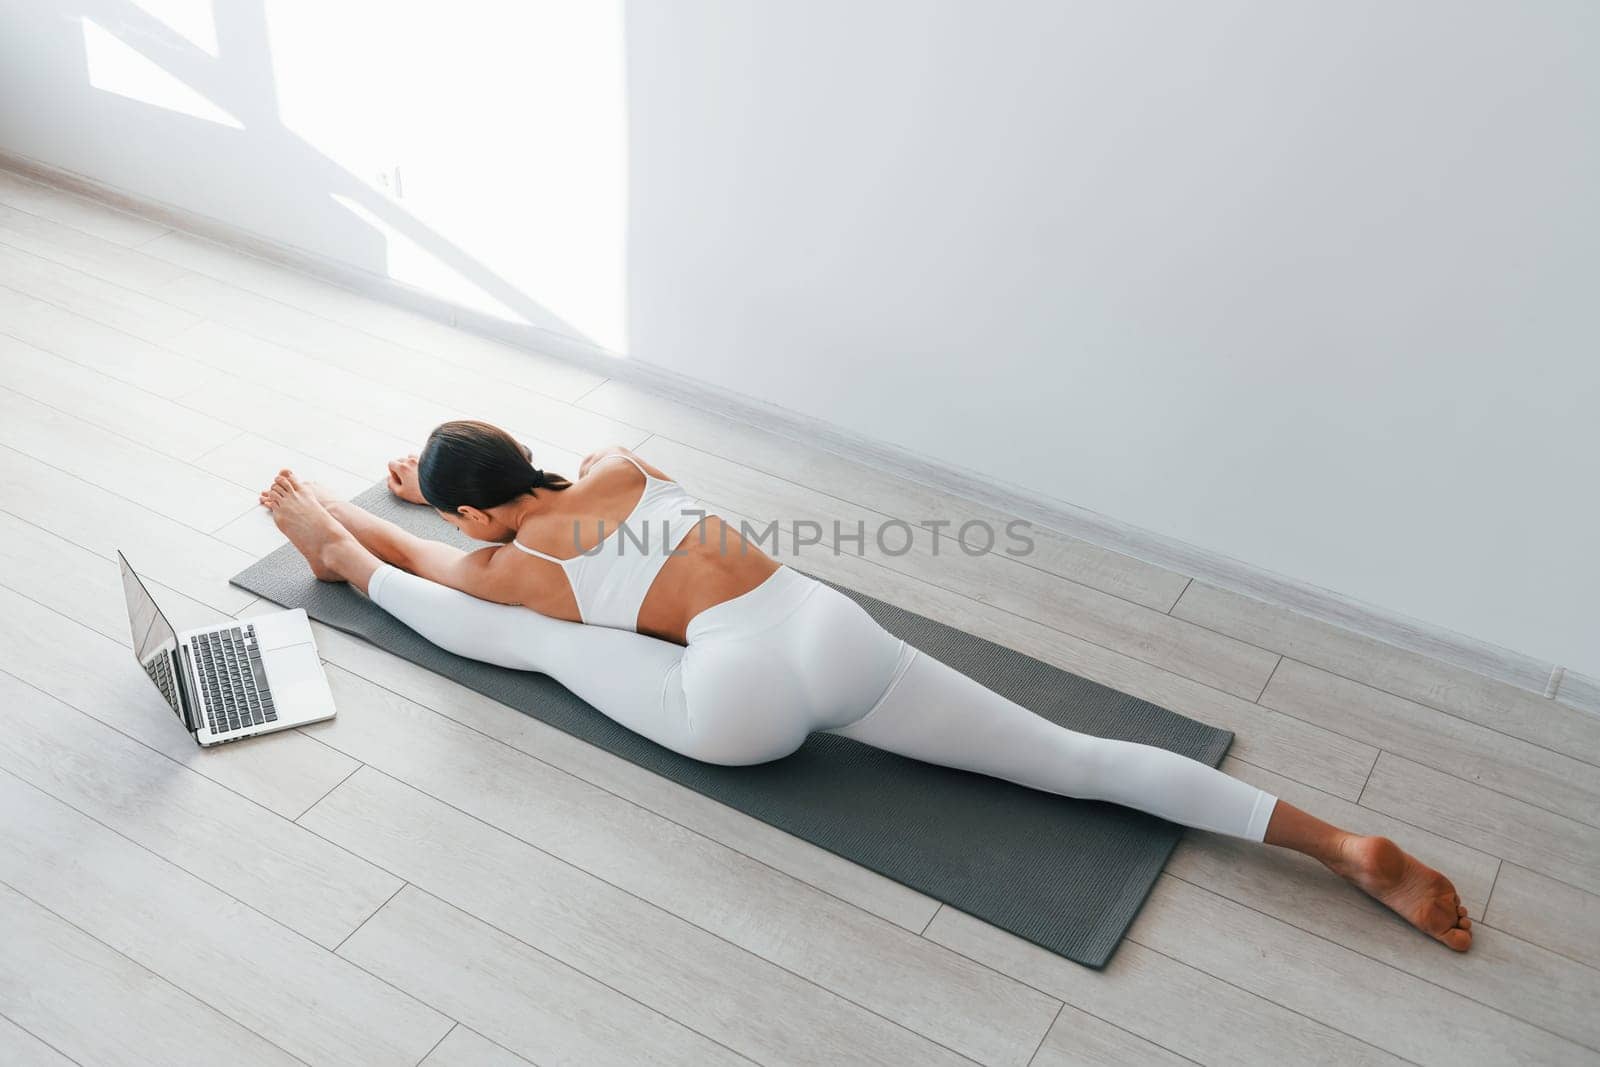 With laptop. Young caucasian woman with slim body shape is indoors at daytime by Standret